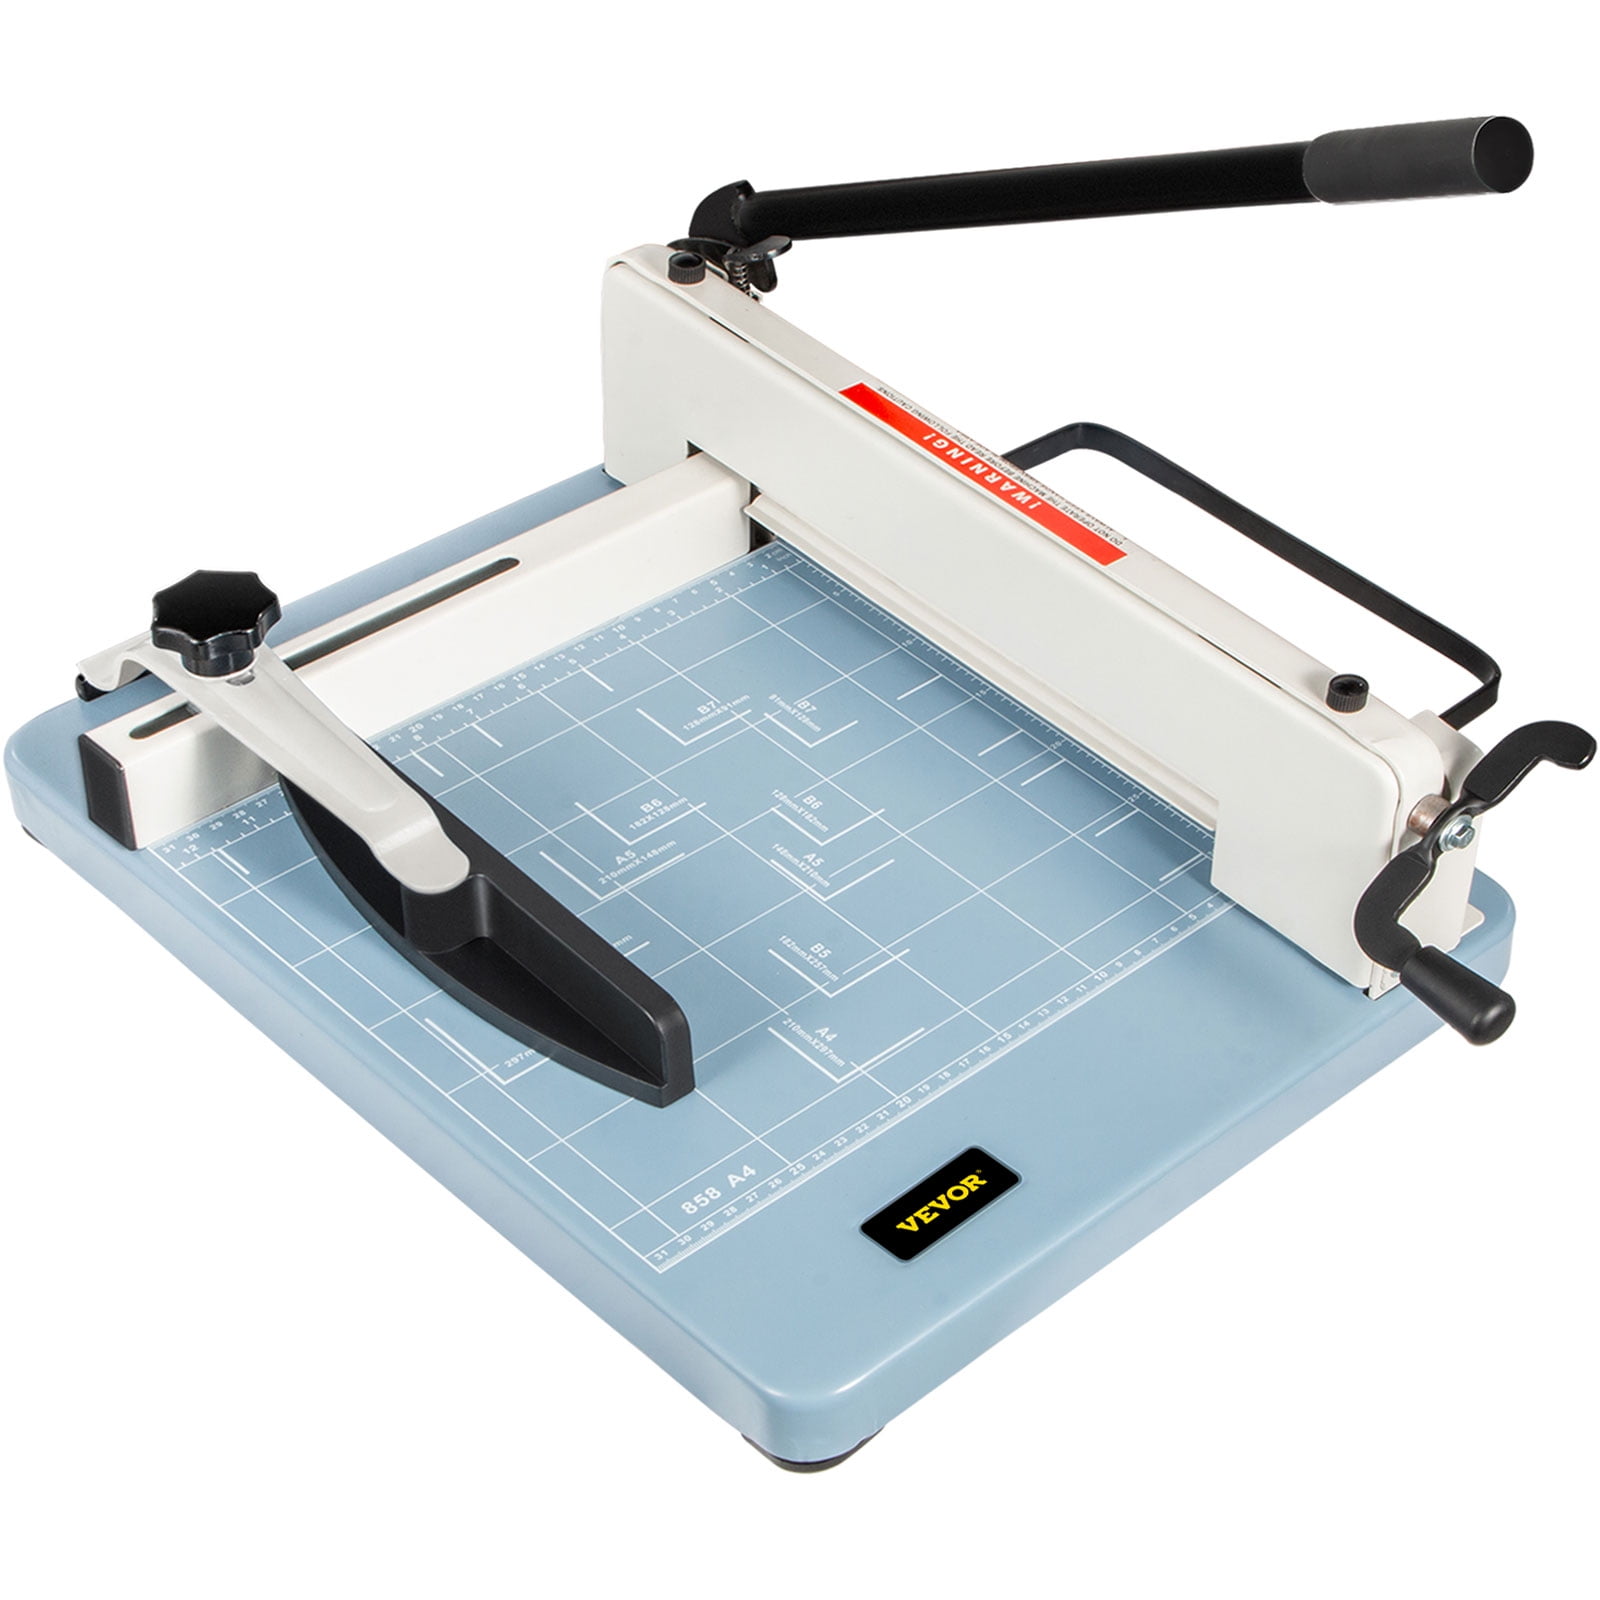 Paper Cutter Industrial Heavy Duty Guillotine Paper Trimmer 17 Inch 500 Sheets 